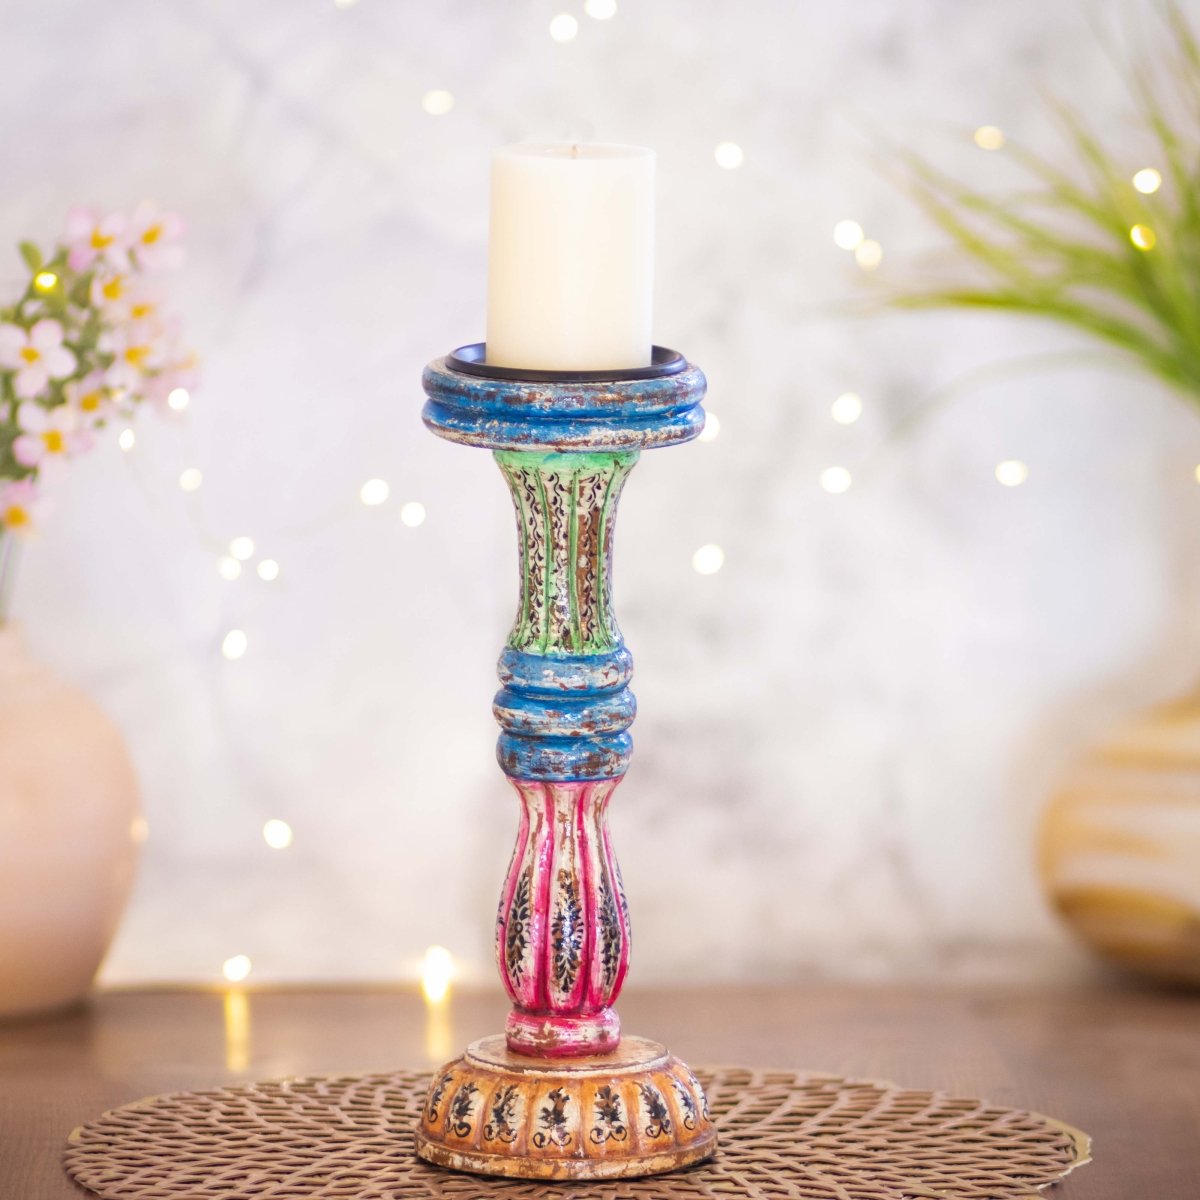 Kezevel Wooden Candle Stand - Antique Distressed Handcrafted Multicolour Candle Holders for Home Decor, Pillar Candle Holder